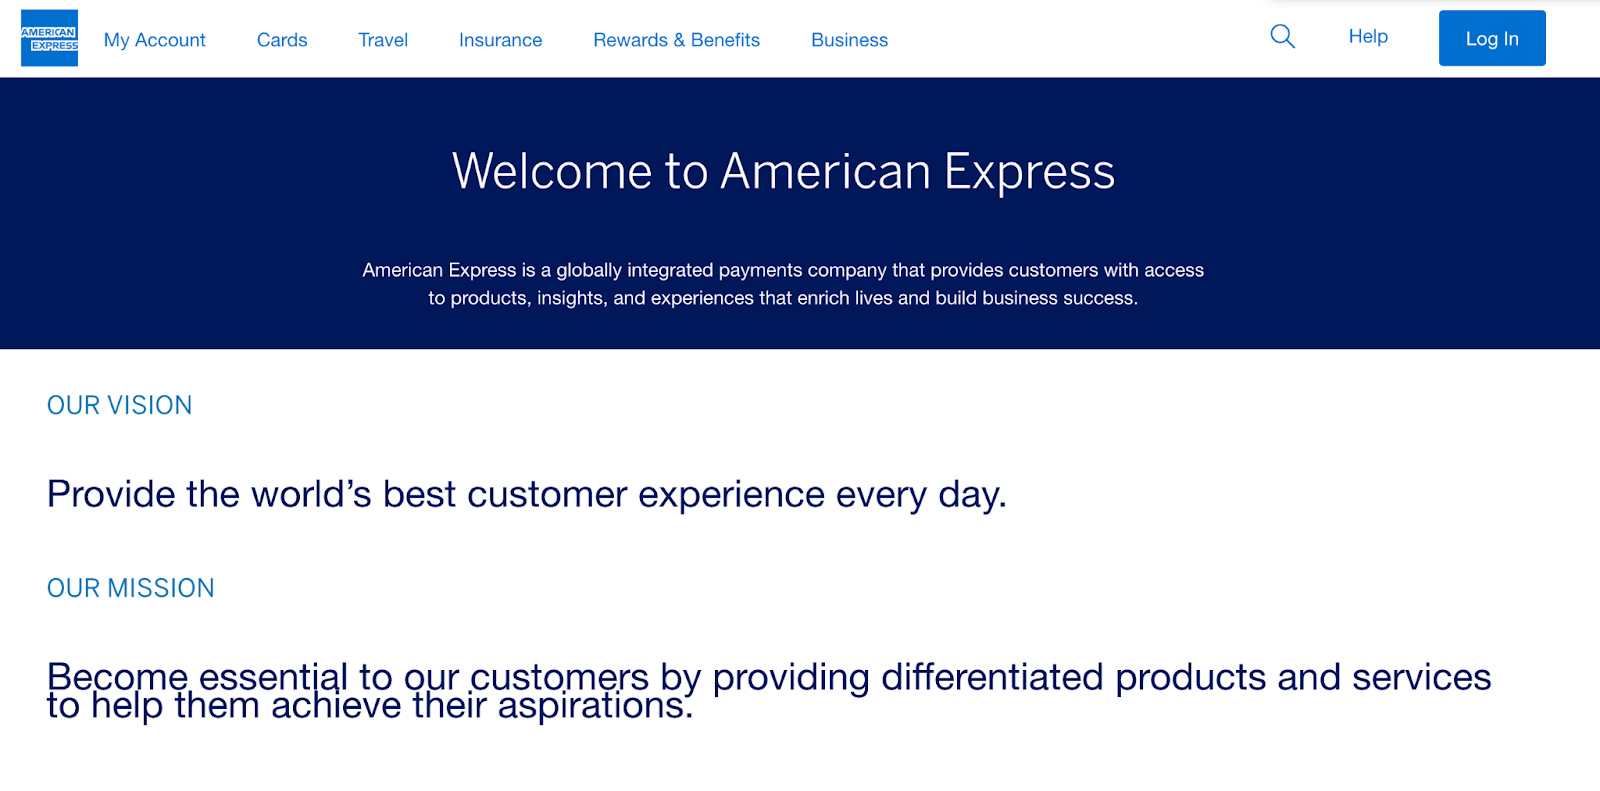 Company mission statement examples: American Express